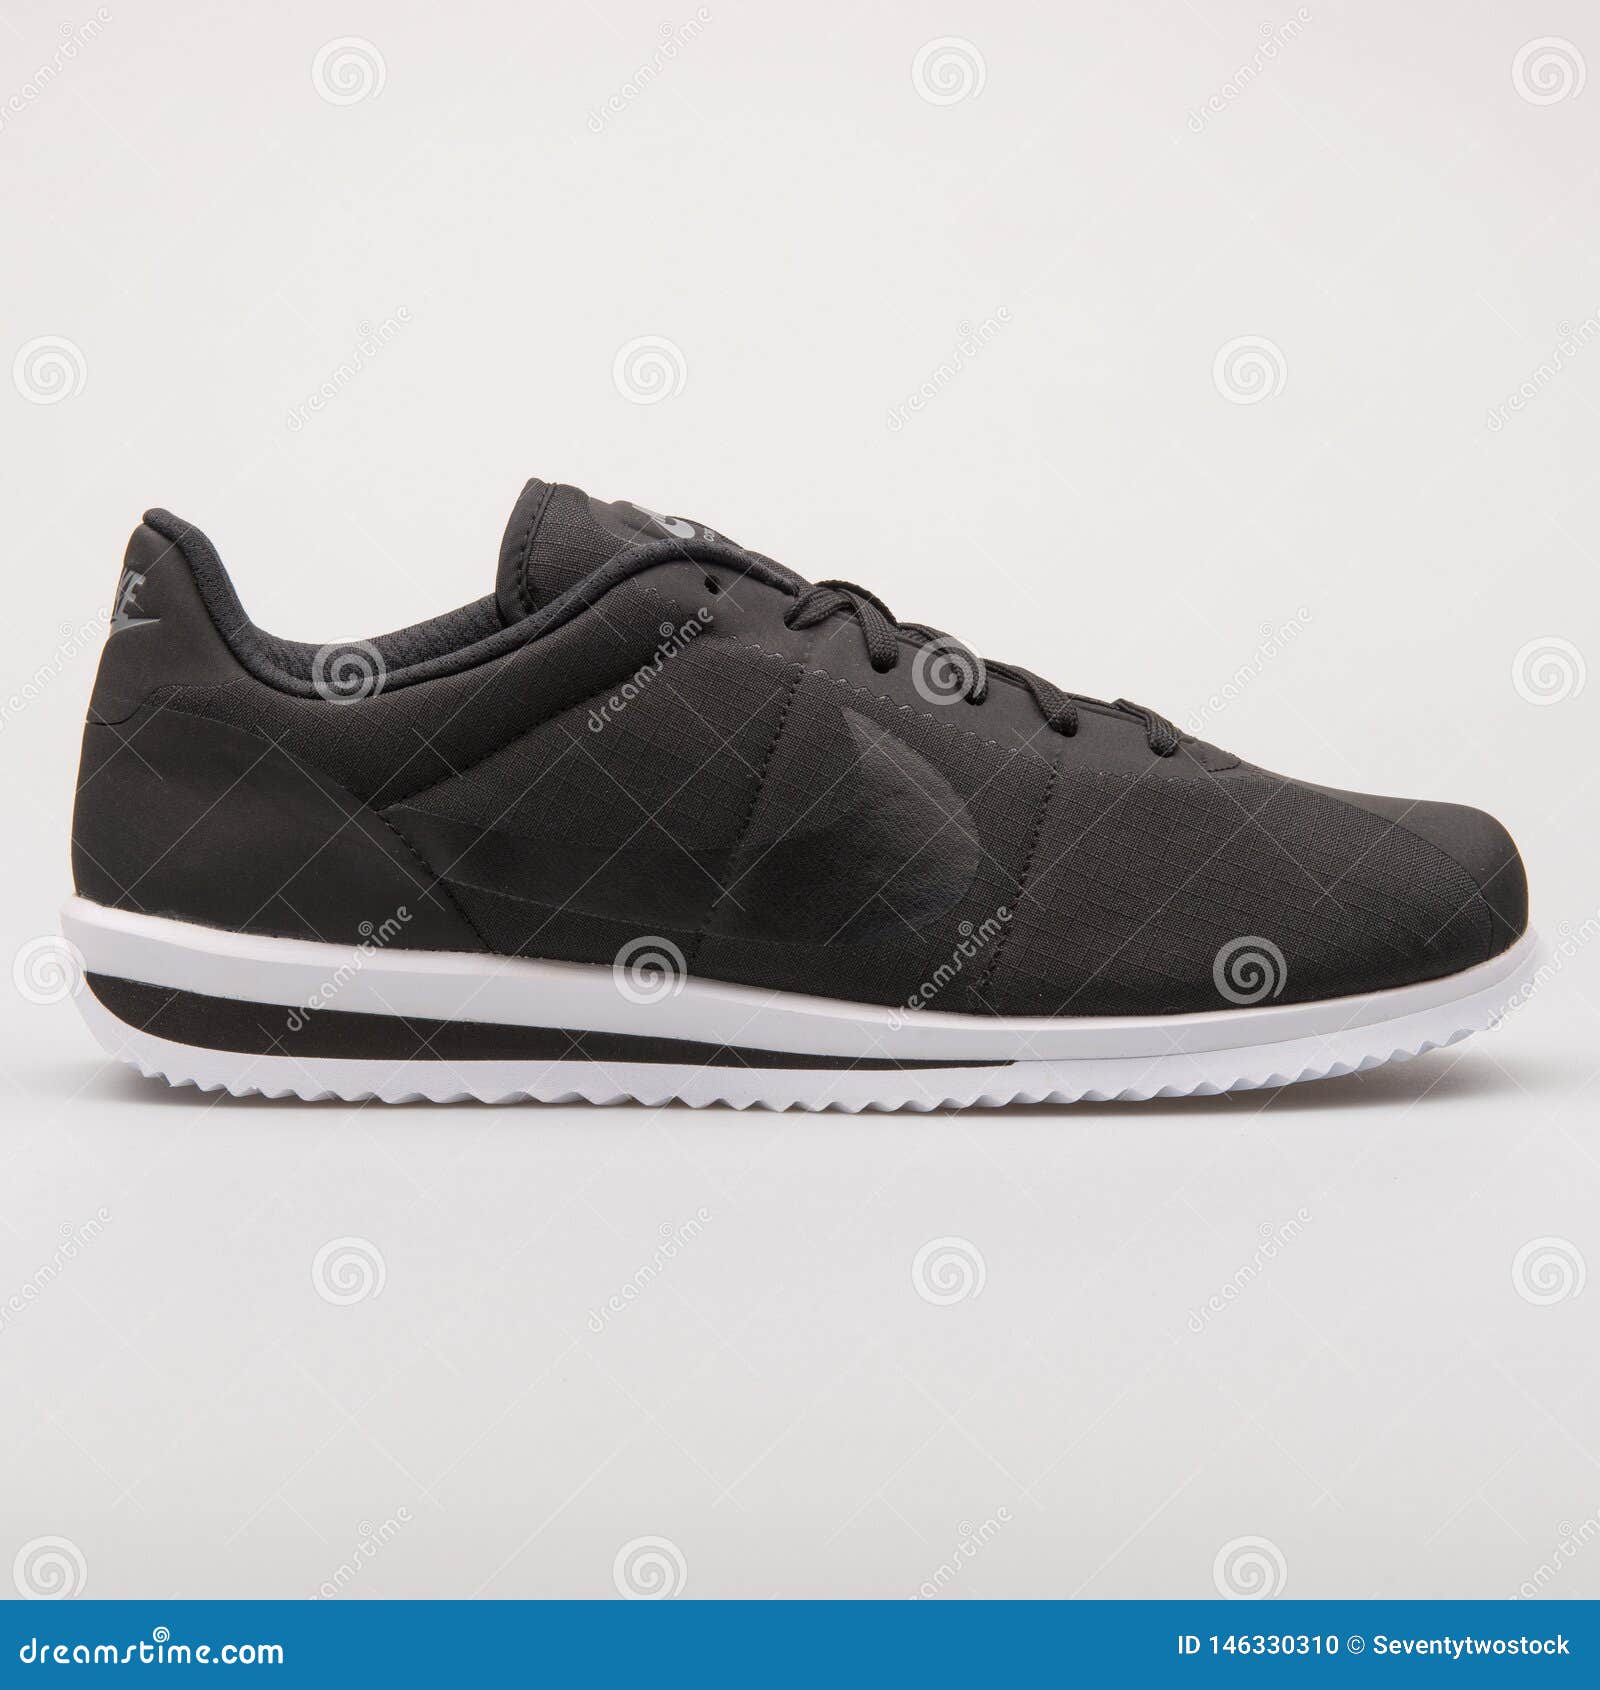 Nike Cortez Black Sneaker Editorial Image - Image of isolated, shoes: 146330310